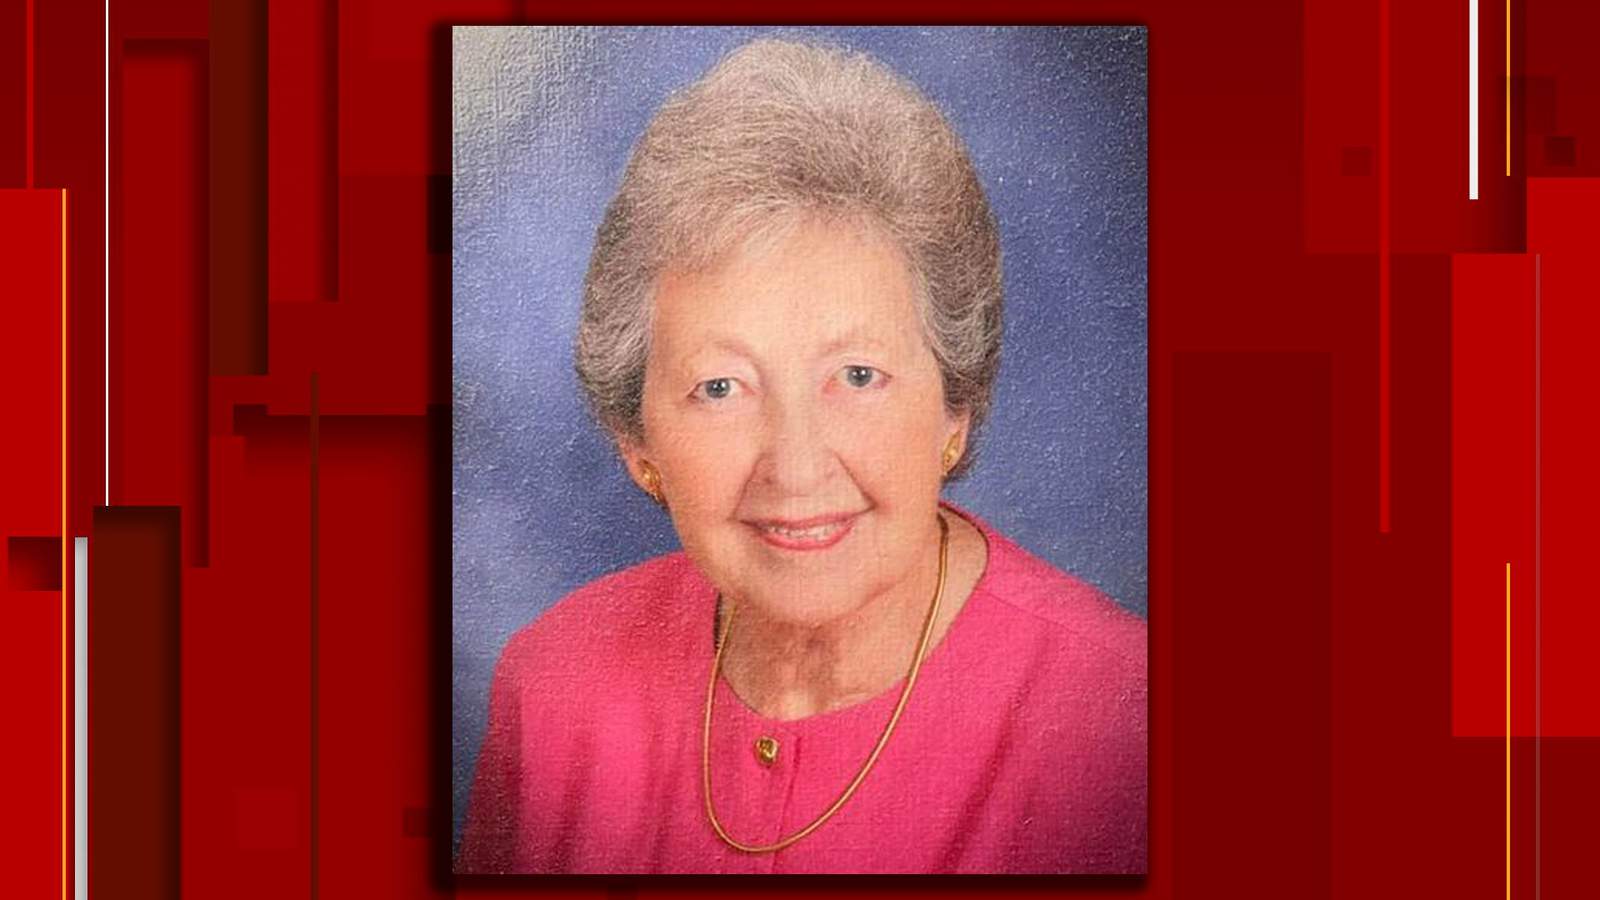 86-year-old woman with Alzheimer’s found safe in Danville